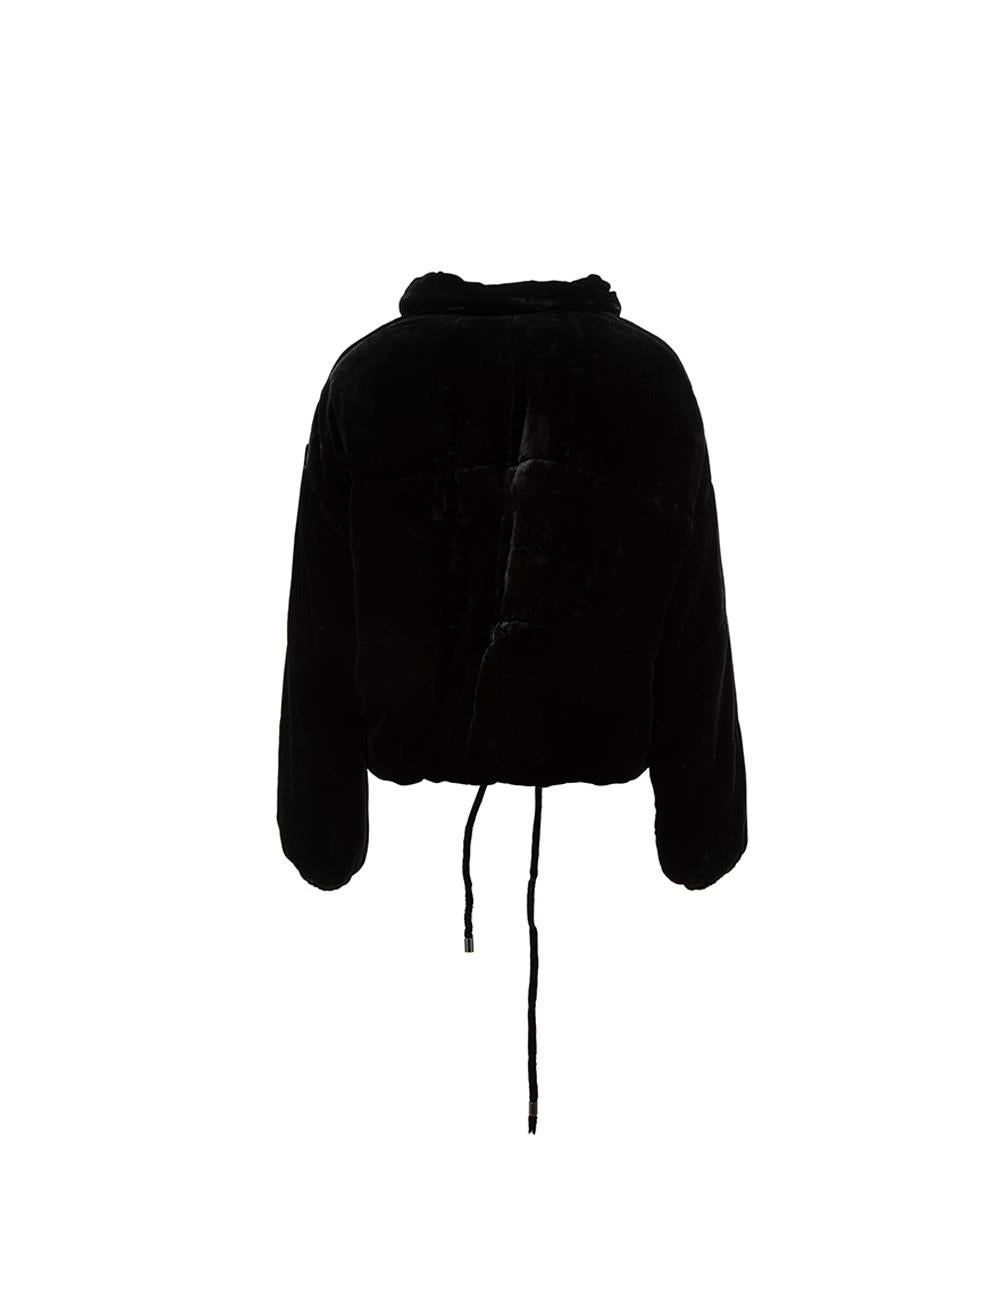 Isabel Marant Women's Black Velour Puffer Jacket In Excellent Condition For Sale In London, GB